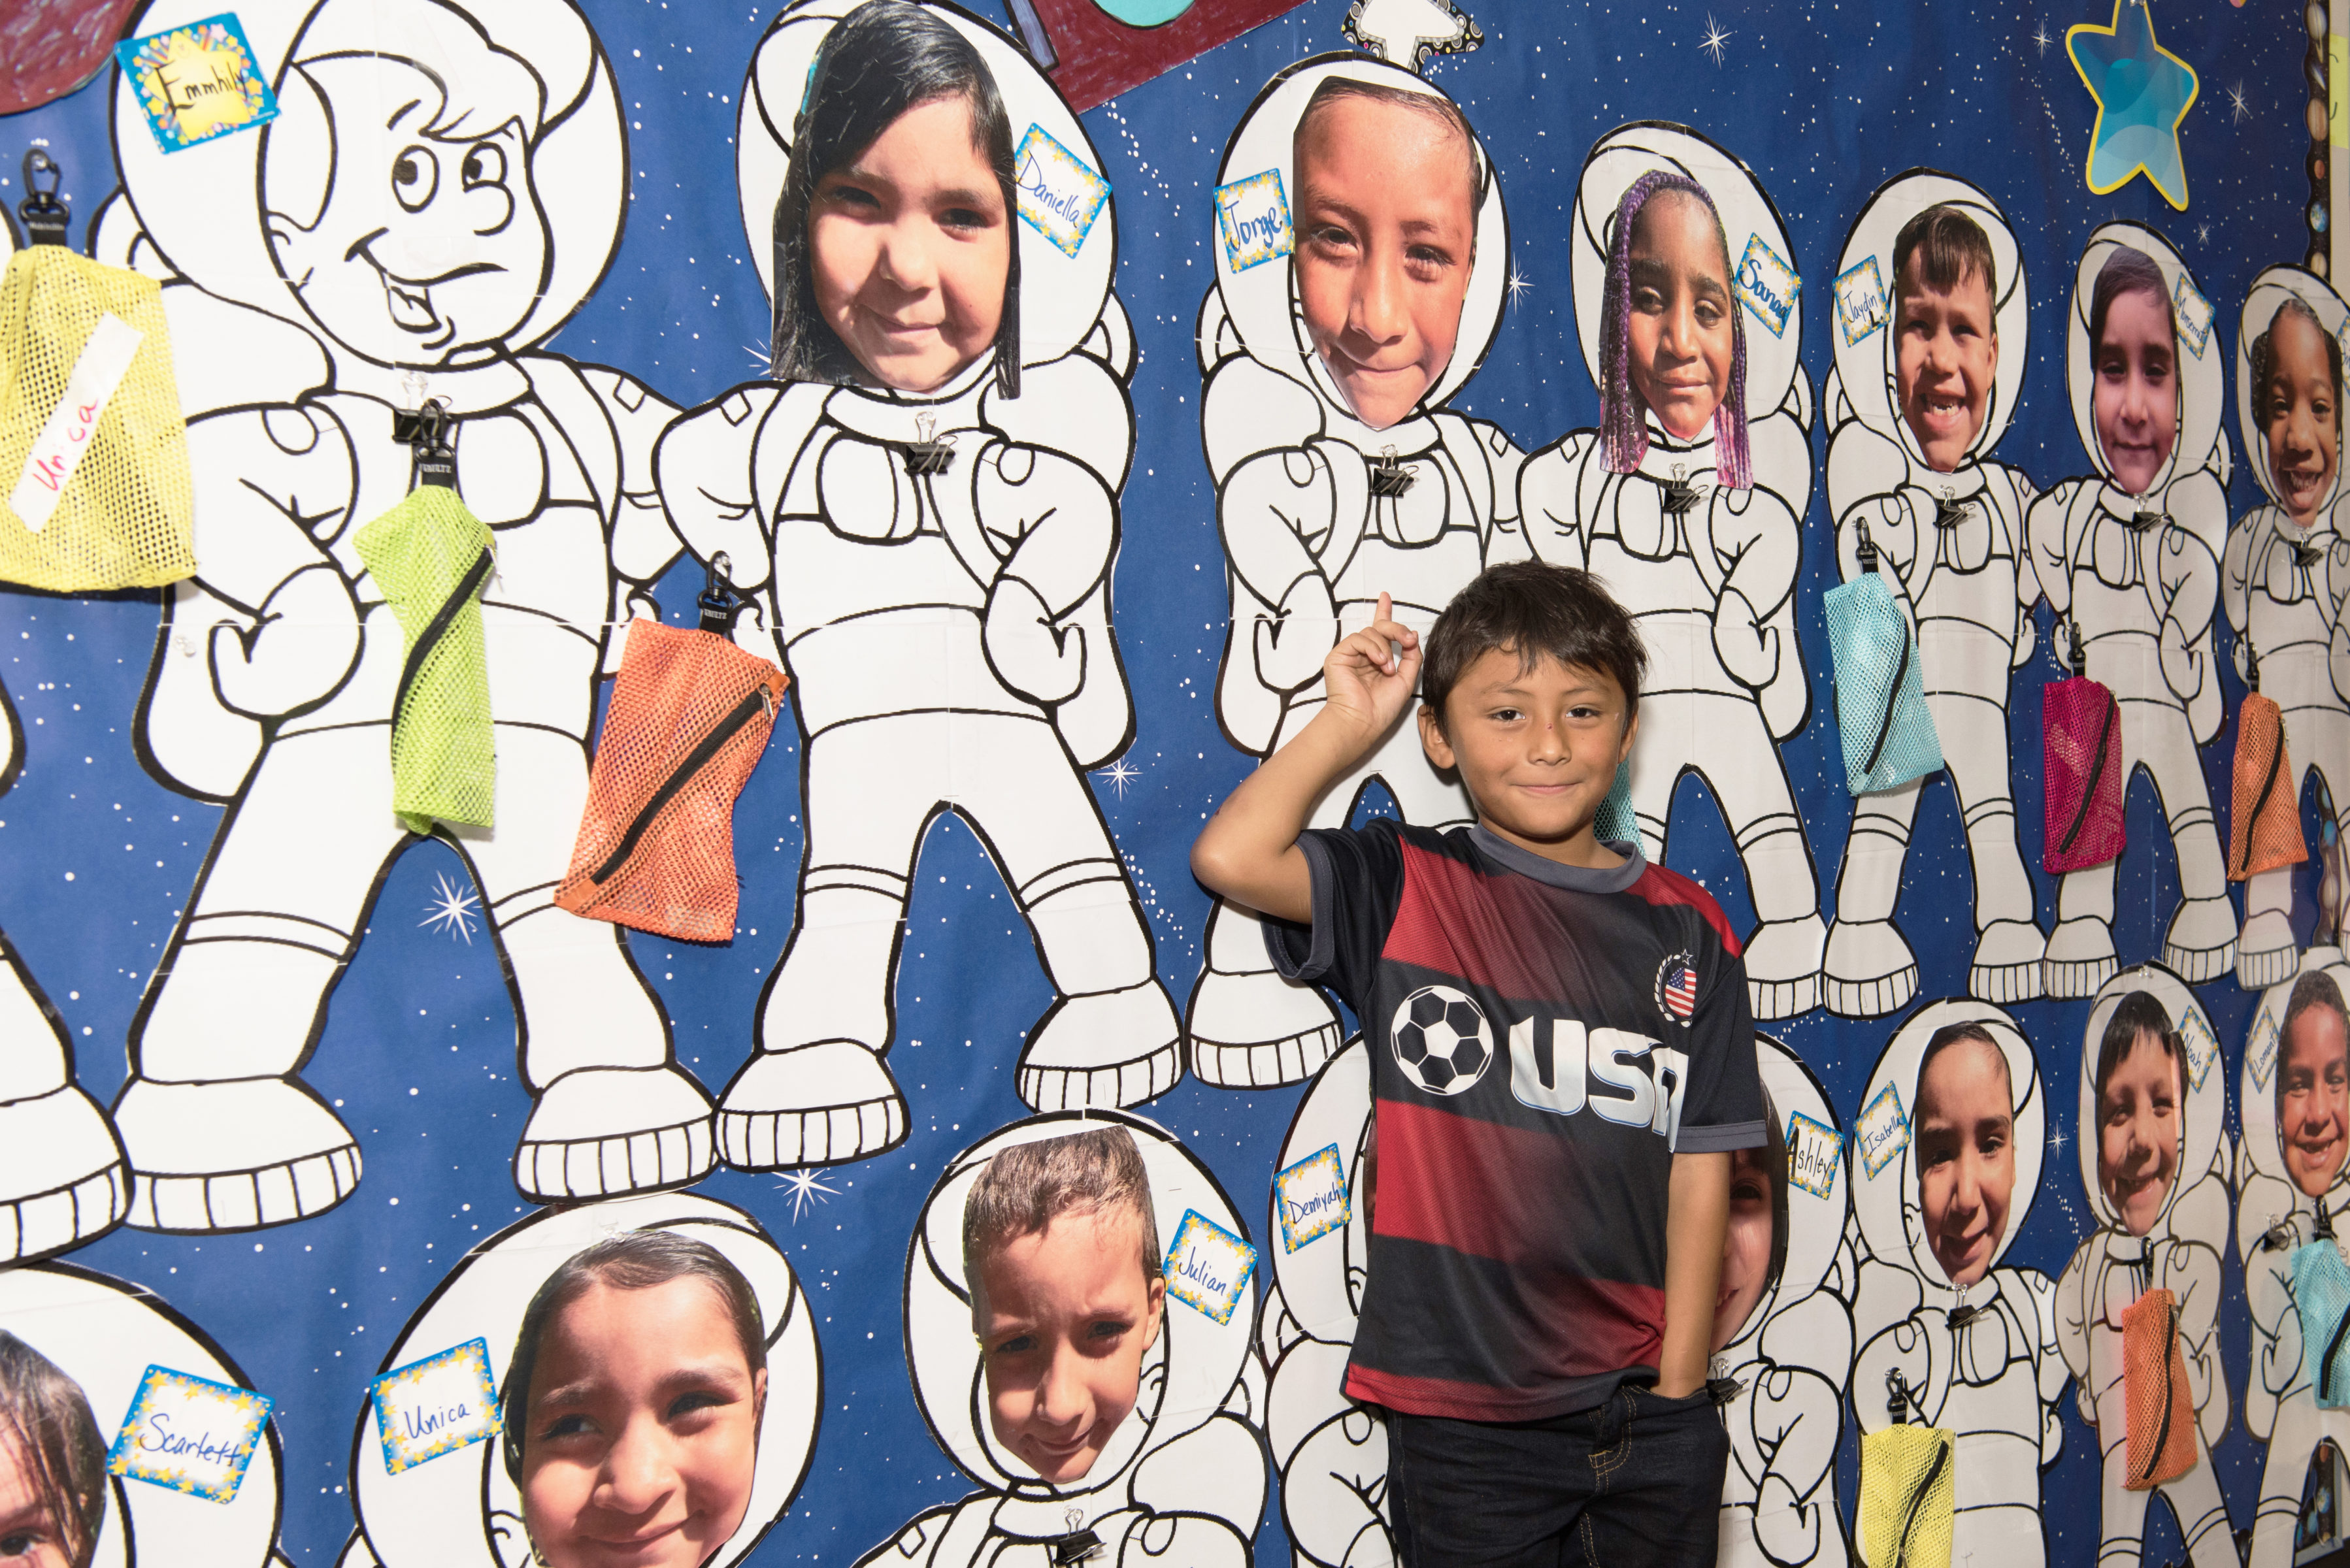 Young boy points to picture of himself as an astronaut on classroom wall.